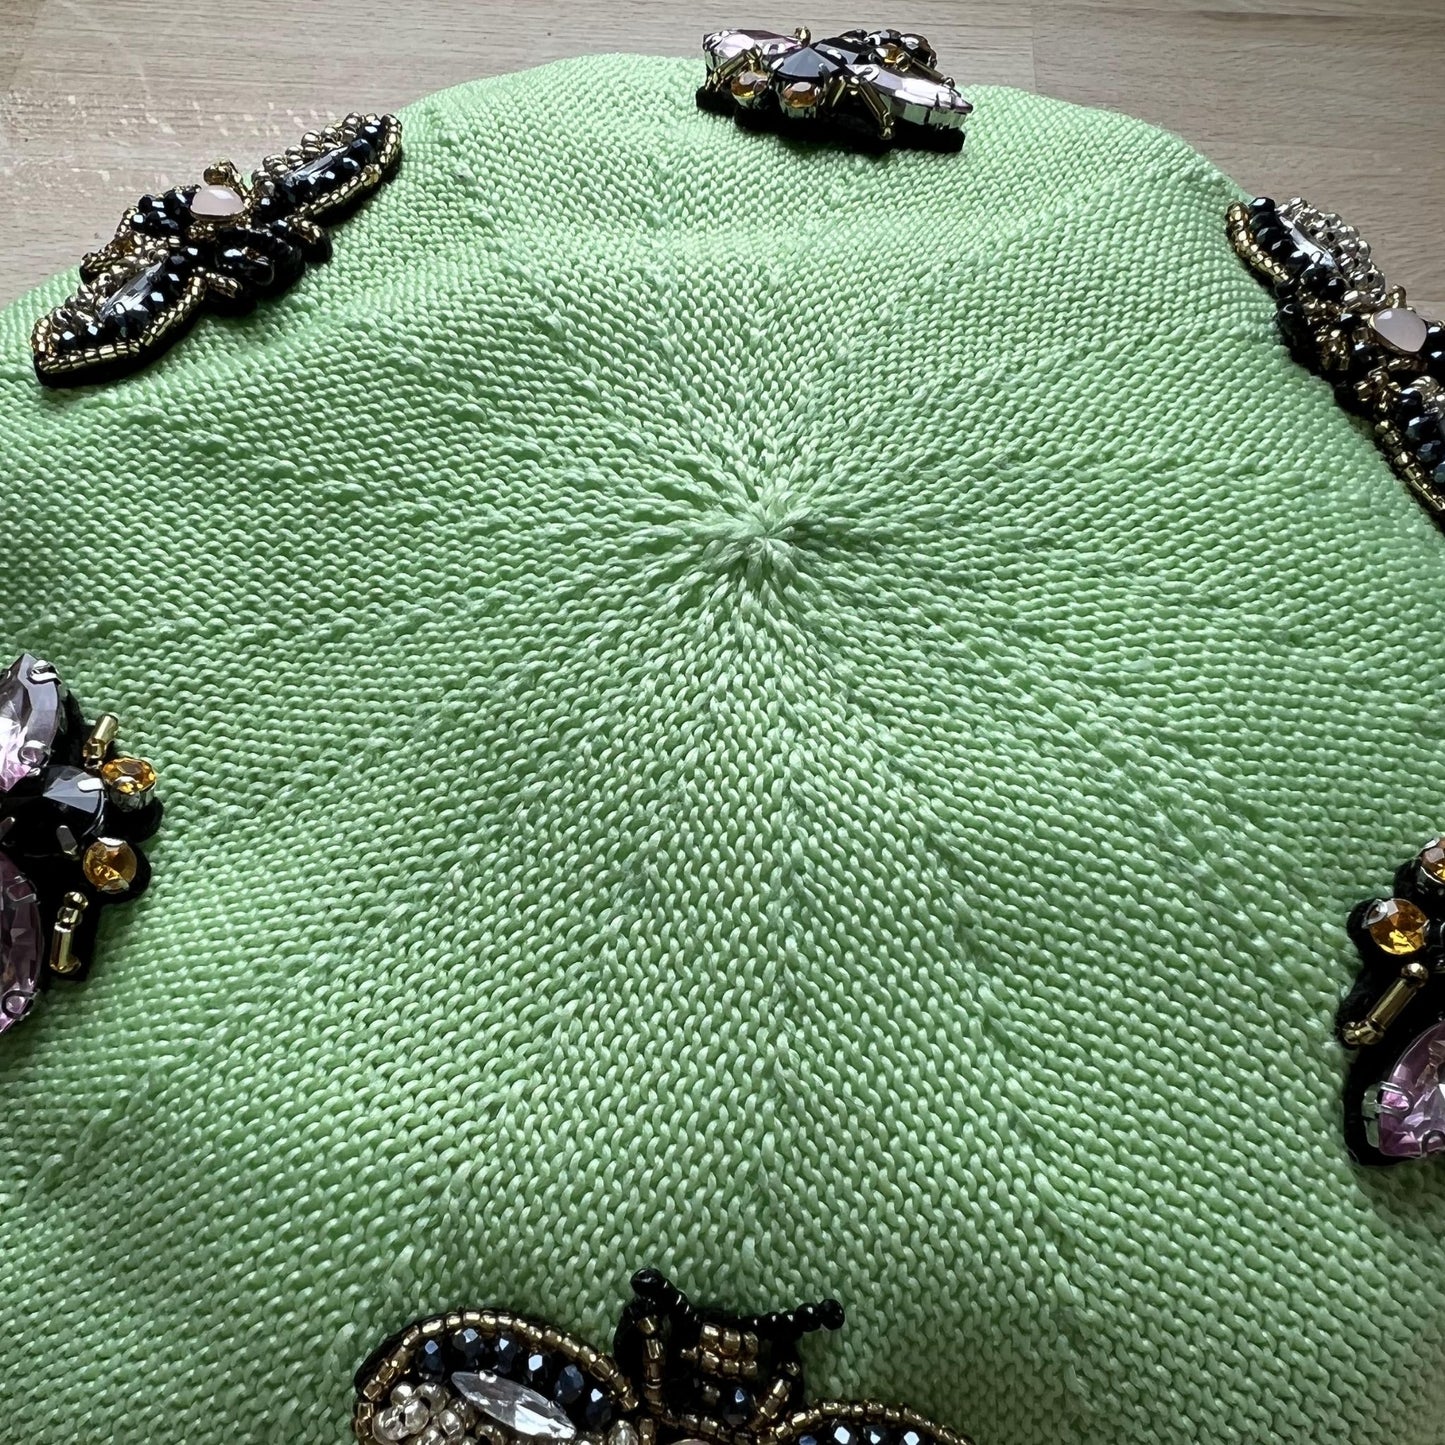 Handmade Green Beret Hat with Embellished Bees